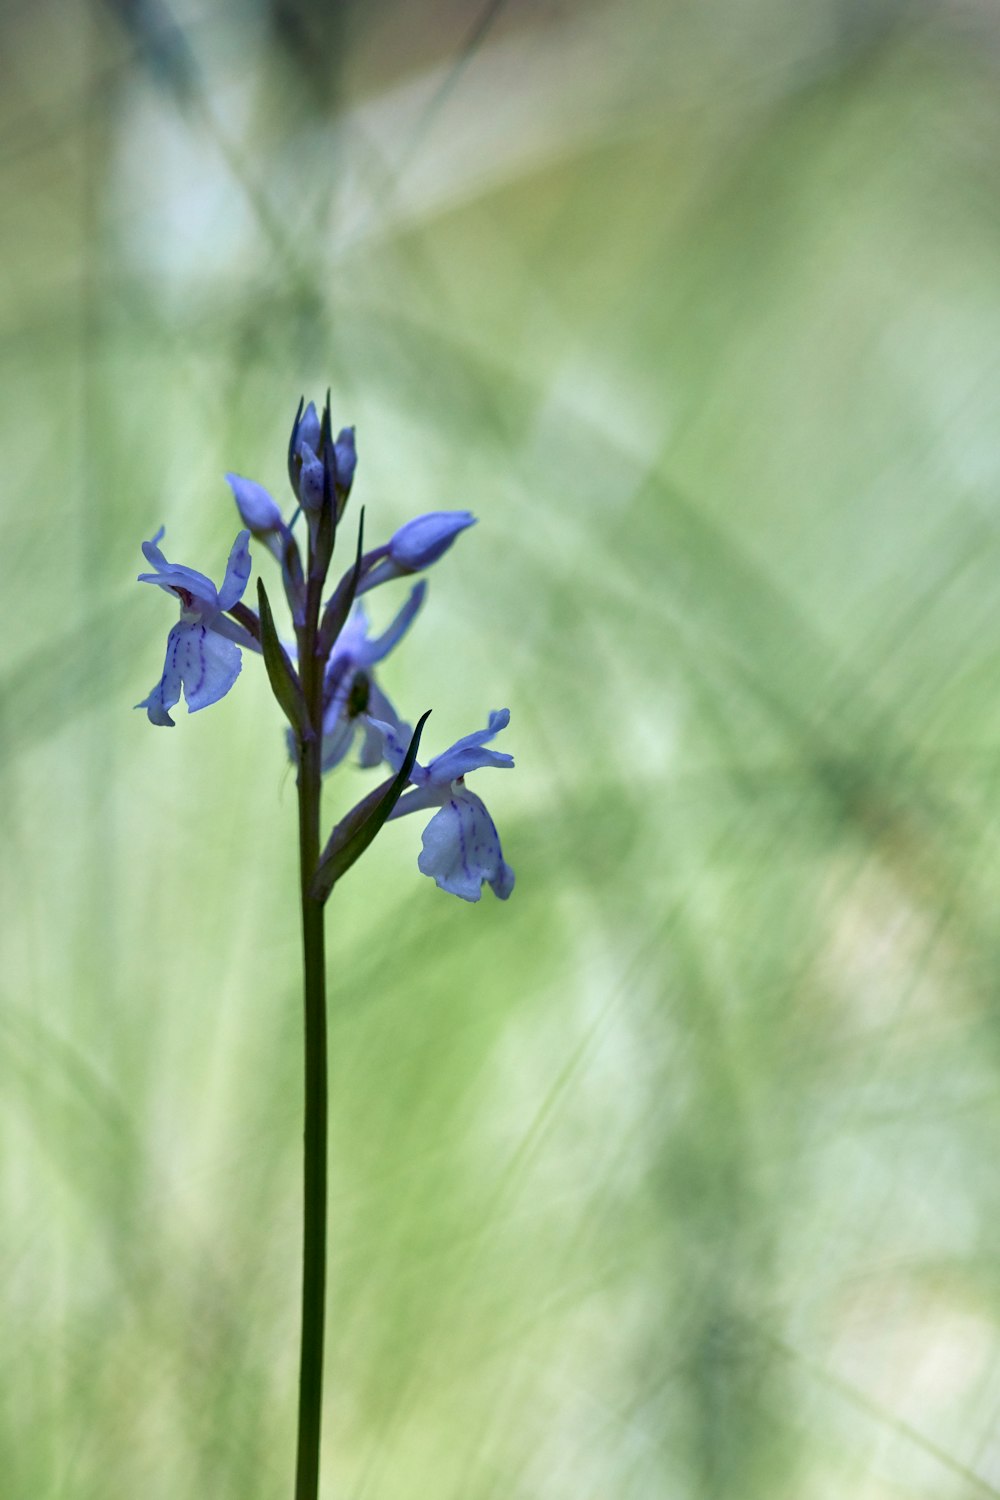 a small blue flower with a blurry background